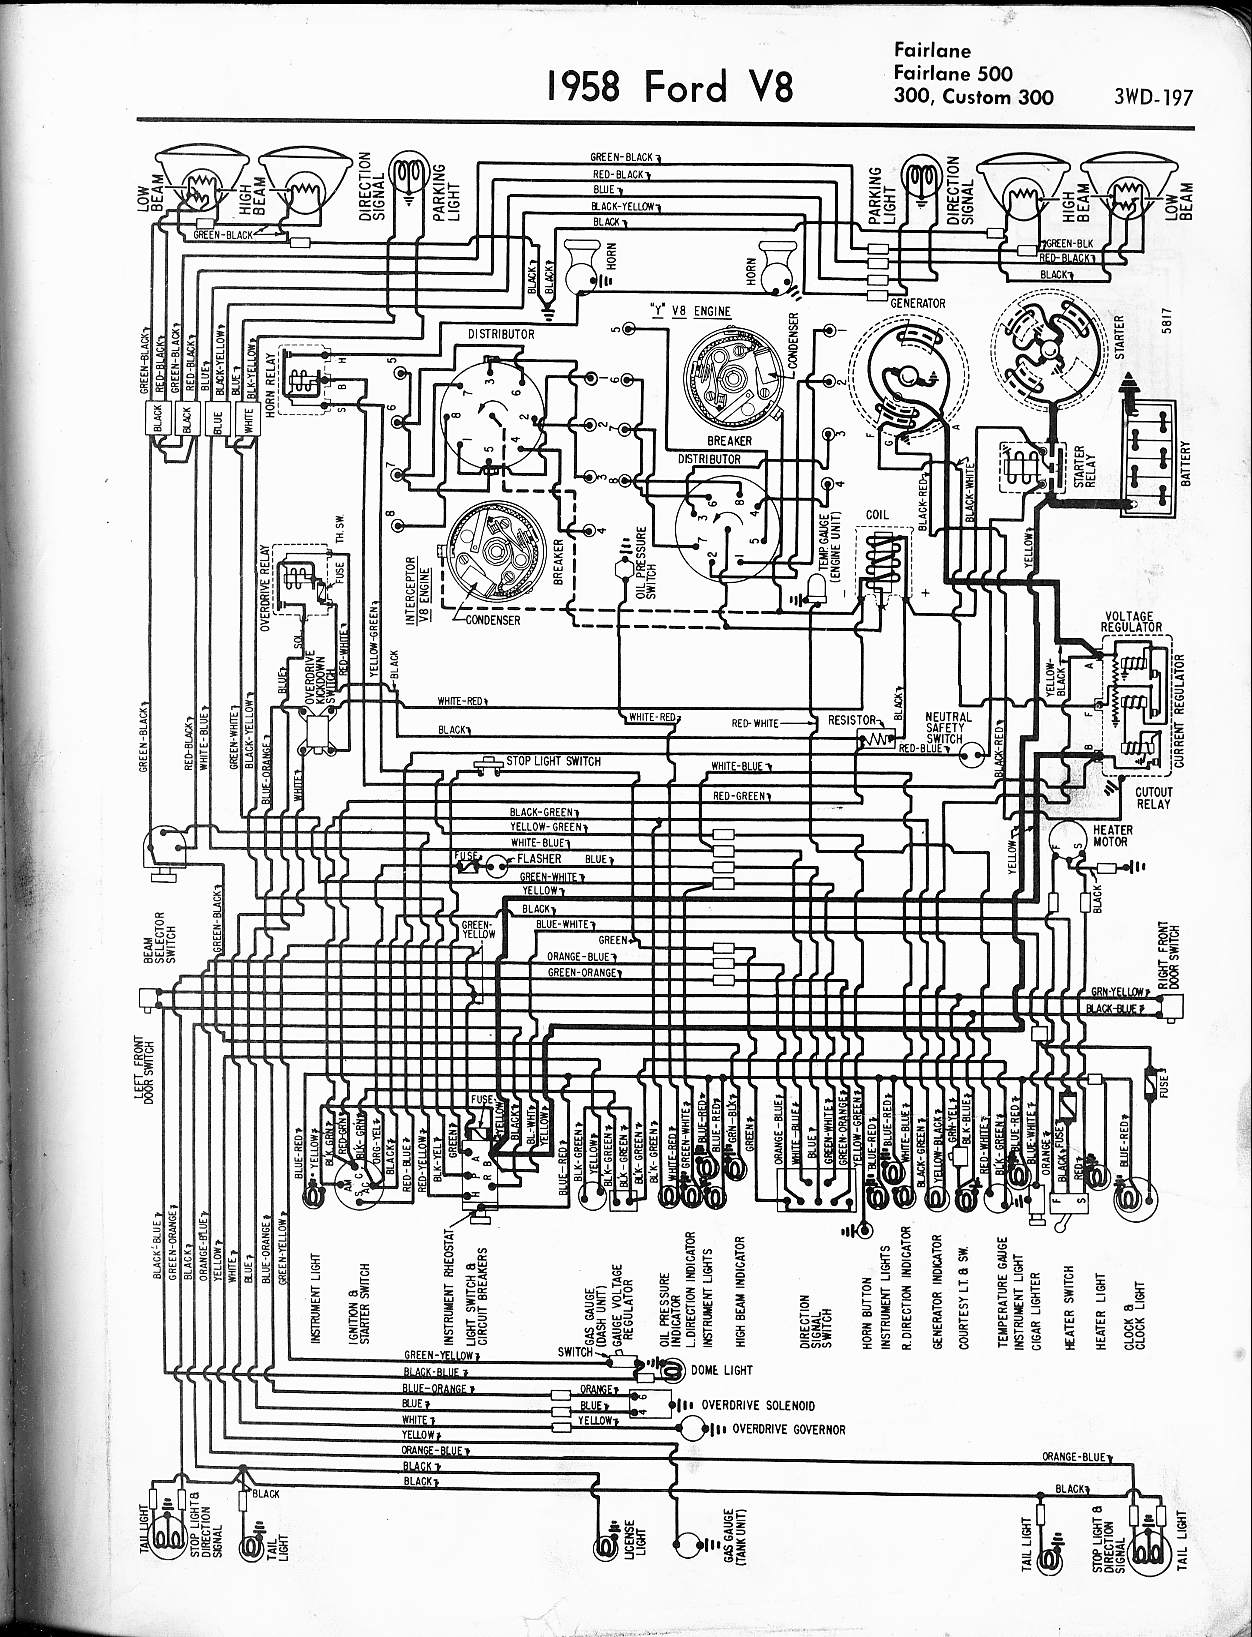 Wire diagram for ford #9